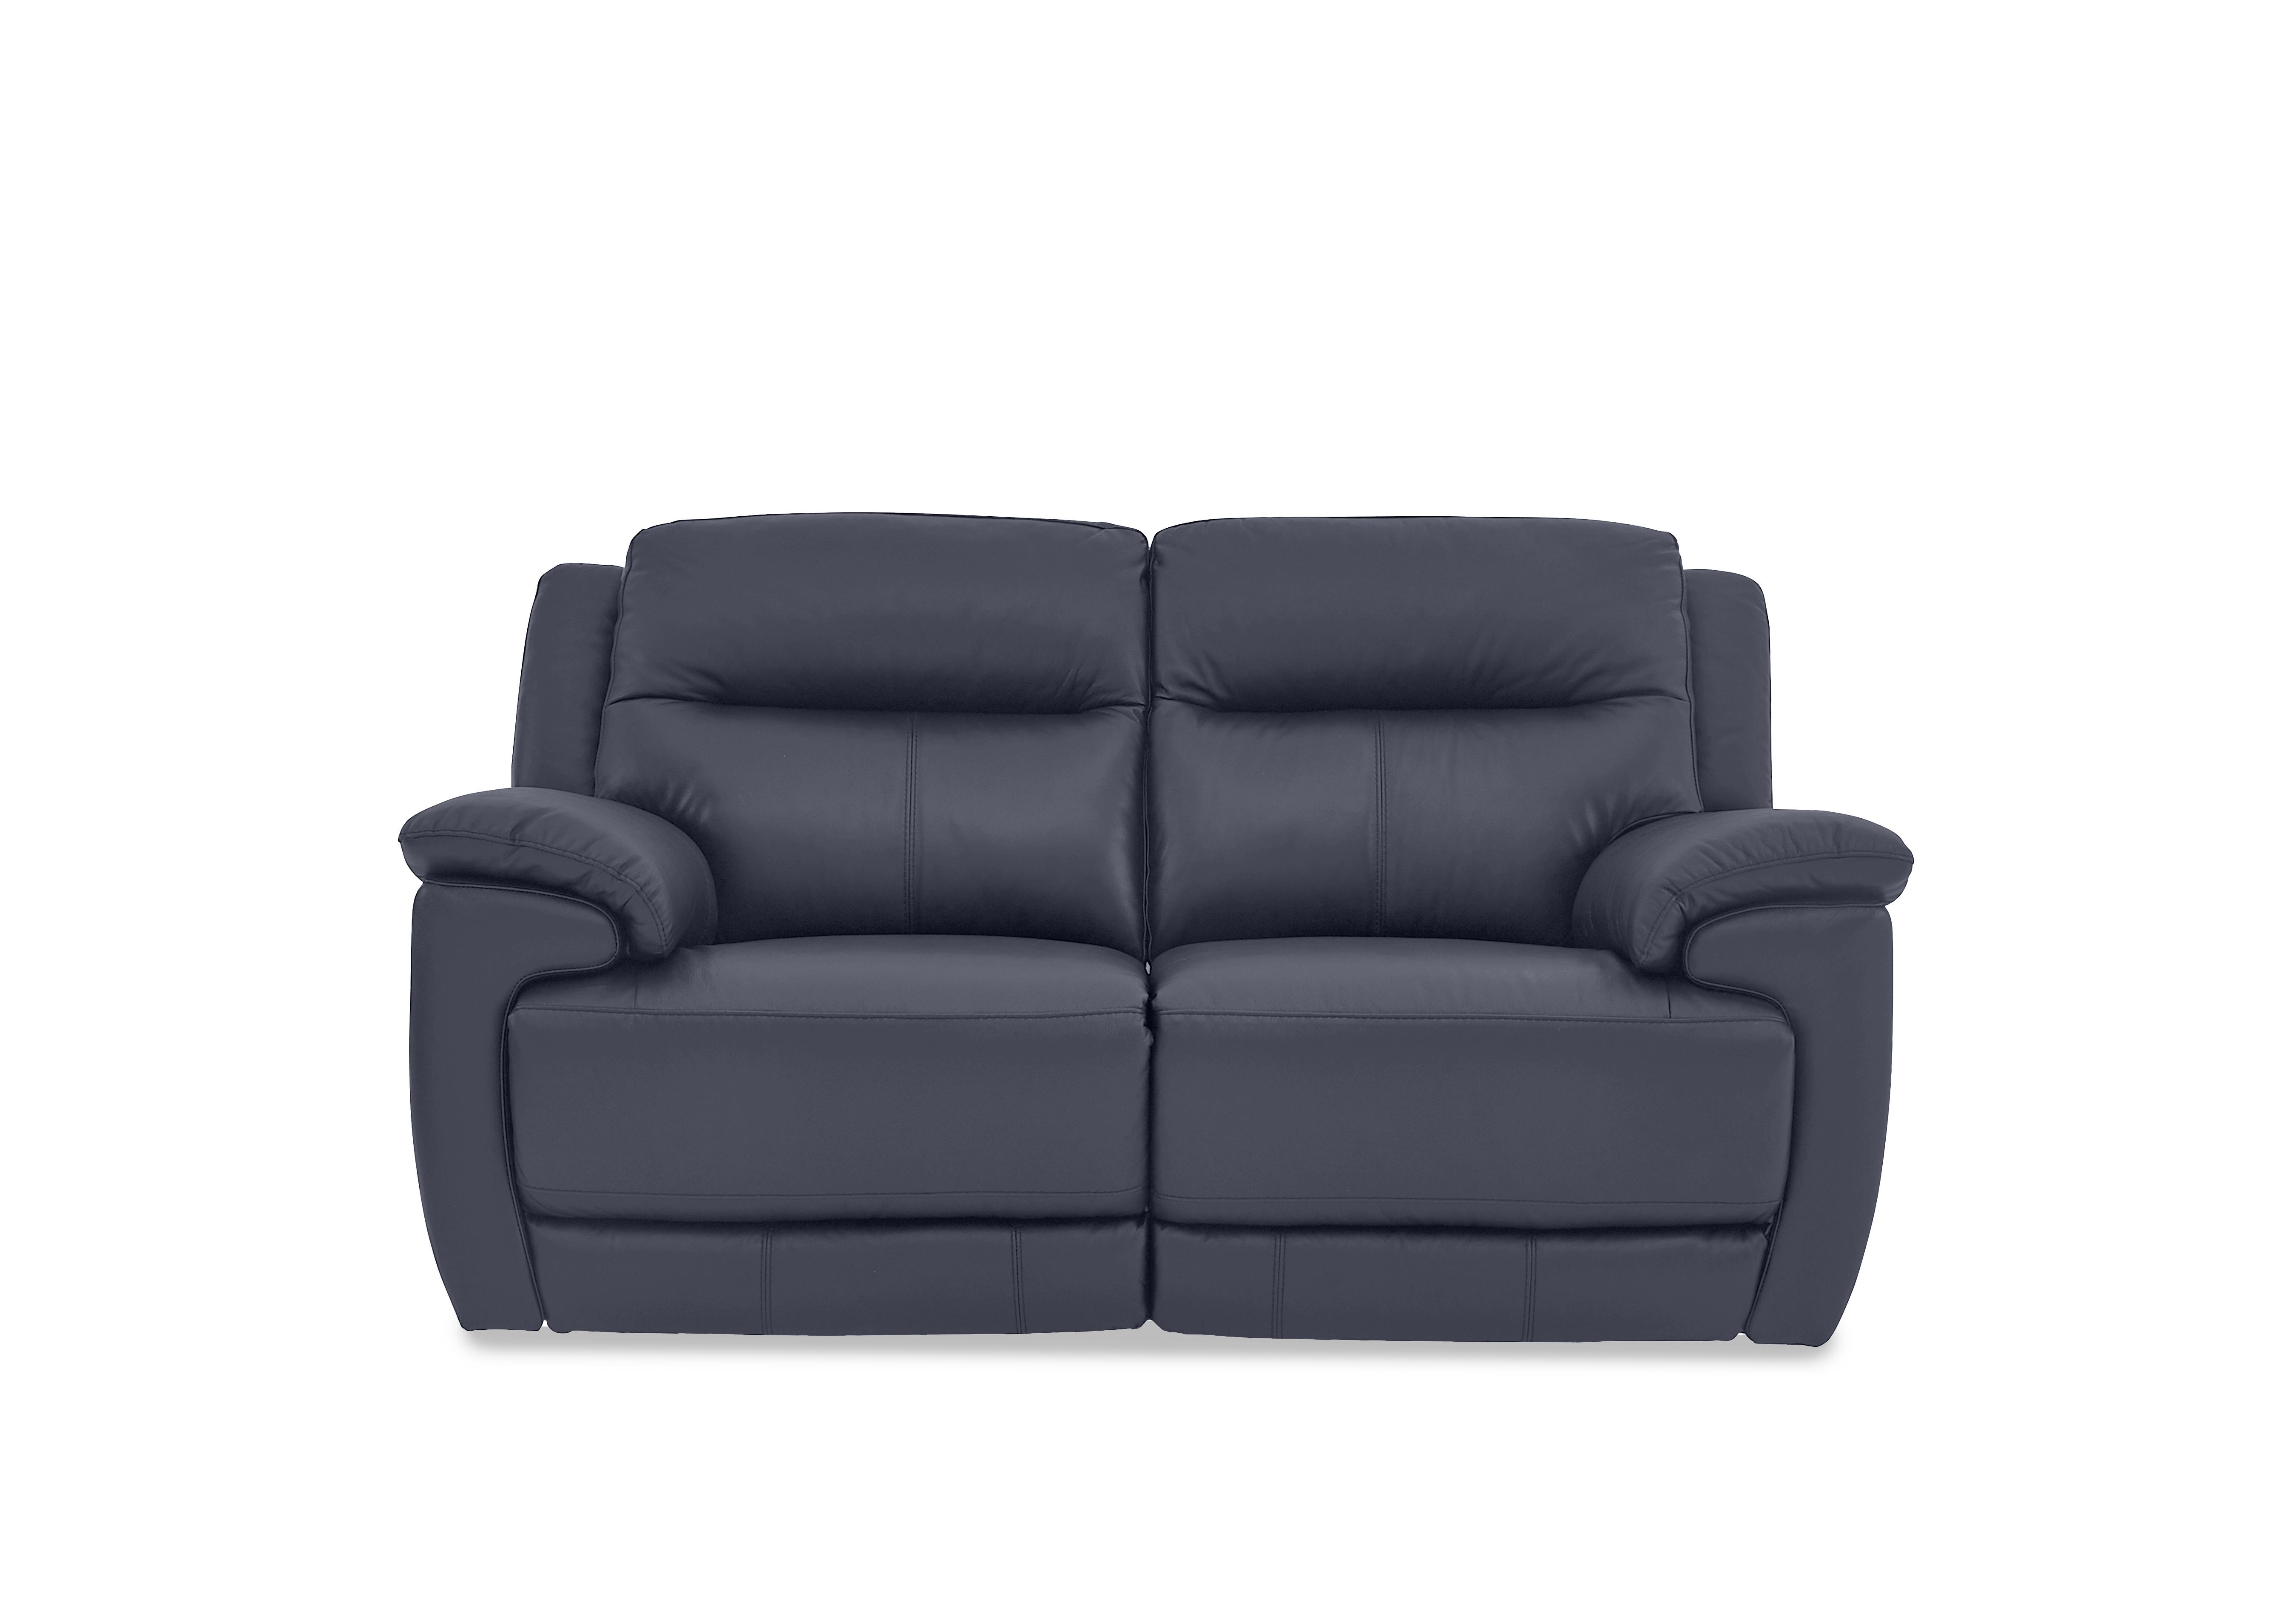 Touch 2 Seater Leather Sofa in Bv-313e Ocean Blue on Furniture Village